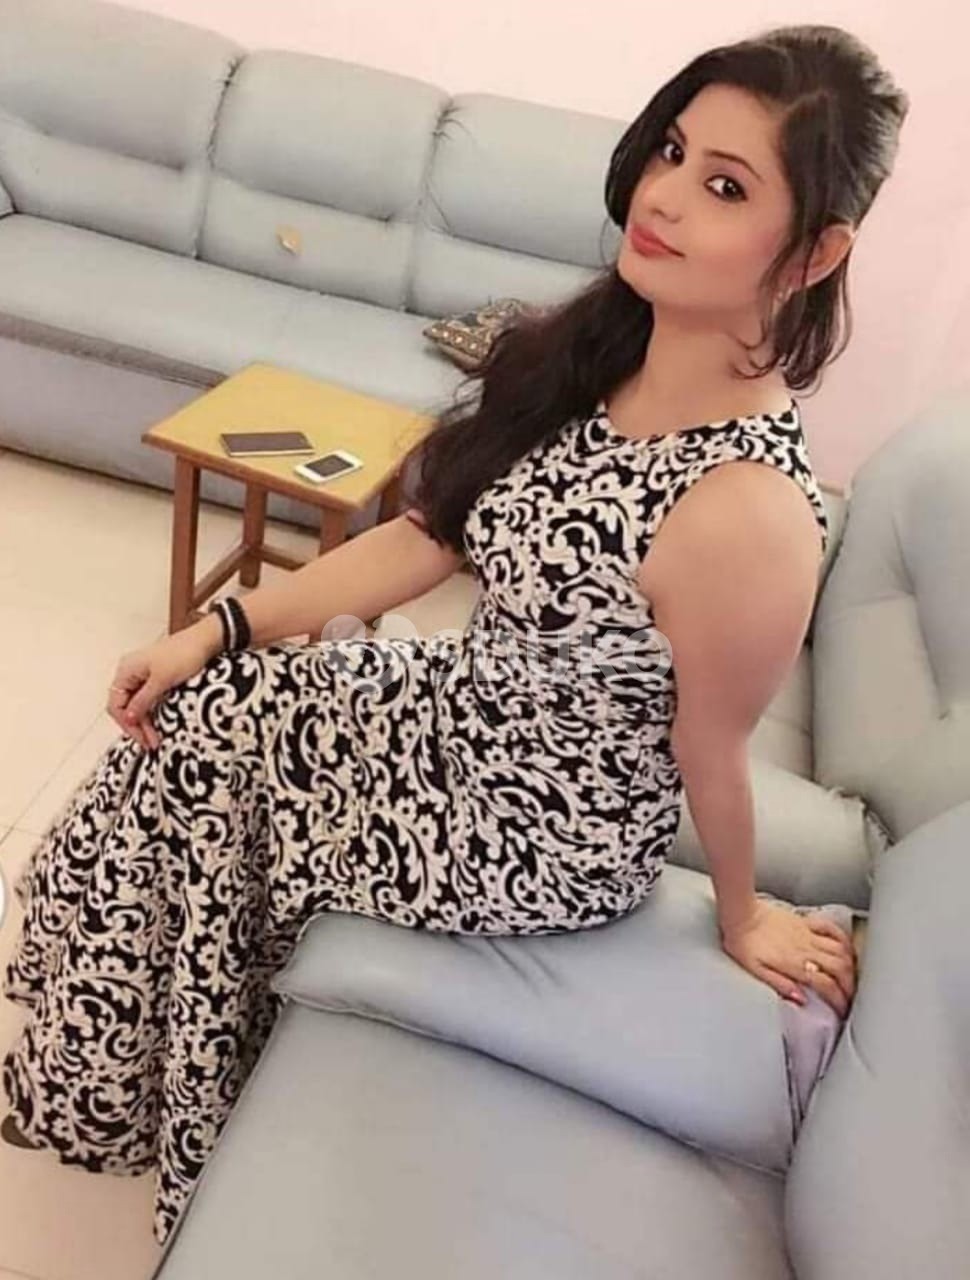 ASHOK NAGAR TOP 🙋‍♀️TODAY LOW COST HIGH PROFILE INDEPENDENT CALL GIRL SERVICE AVAILABLE 24 HOURS AVAILABLE HOME